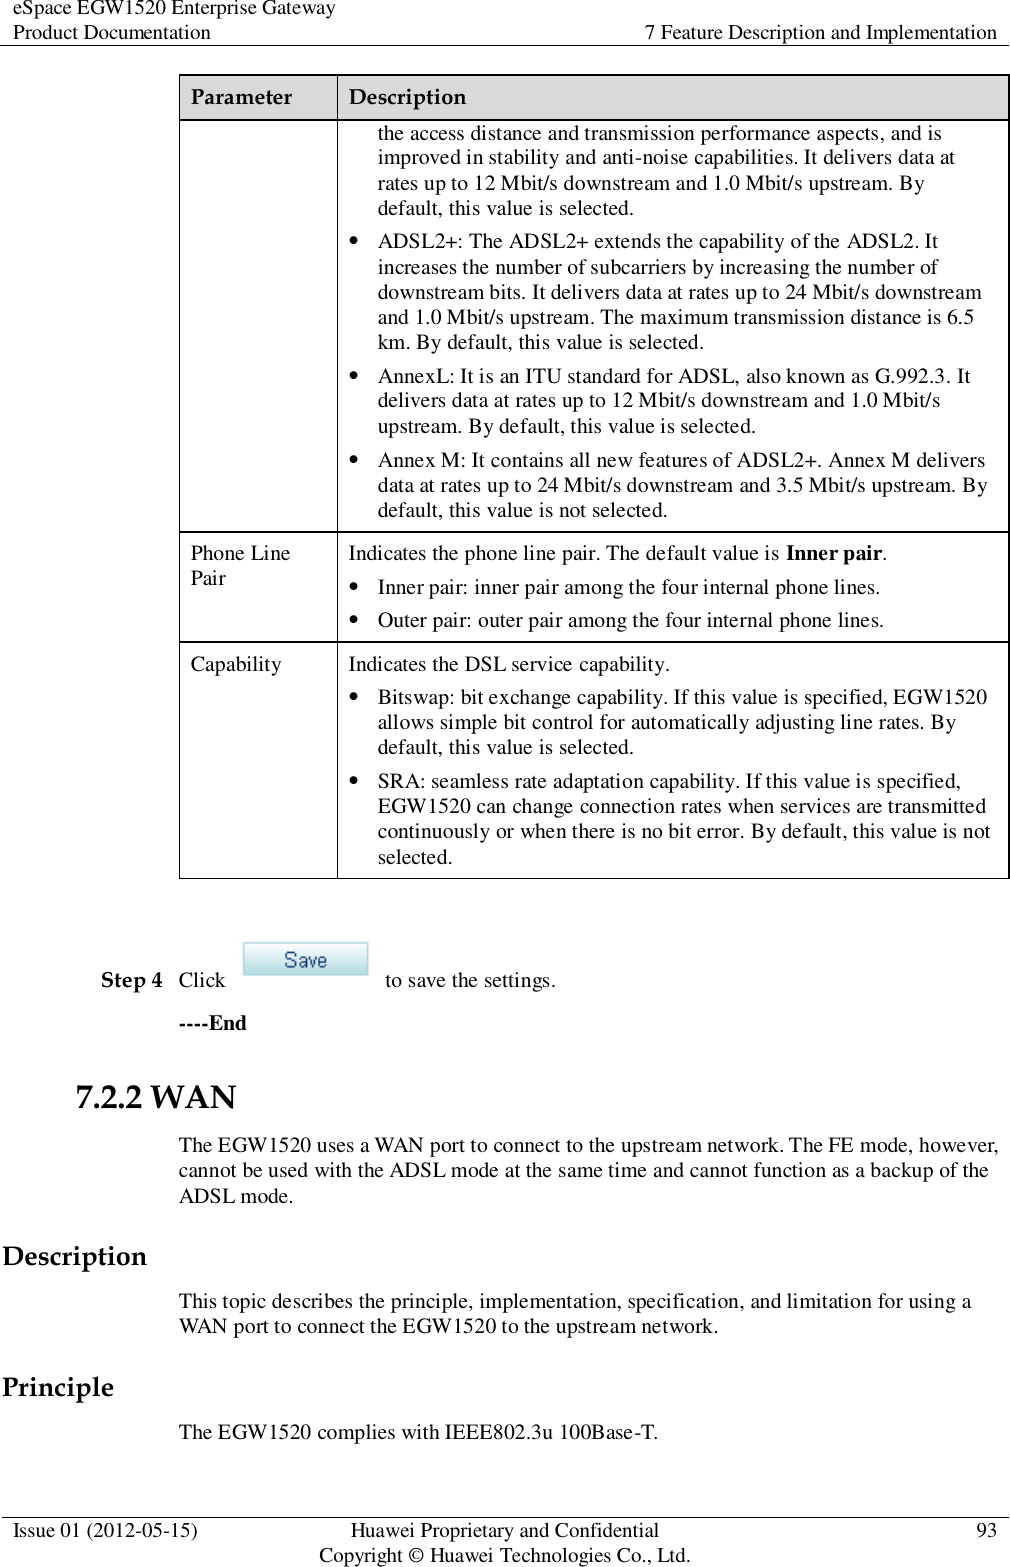 eSpace EGW1520 Enterprise Gateway Product Documentation 7 Feature Description and Implementation  Issue 01 (2012-05-15) Huawei Proprietary and Confidential                                     Copyright © Huawei Technologies Co., Ltd. 93  Parameter Description the access distance and transmission performance aspects, and is improved in stability and anti-noise capabilities. It delivers data at rates up to 12 Mbit/s downstream and 1.0 Mbit/s upstream. By default, this value is selected.  ADSL2+: The ADSL2+ extends the capability of the ADSL2. It increases the number of subcarriers by increasing the number of downstream bits. It delivers data at rates up to 24 Mbit/s downstream and 1.0 Mbit/s upstream. The maximum transmission distance is 6.5 km. By default, this value is selected.  AnnexL: It is an ITU standard for ADSL, also known as G.992.3. It delivers data at rates up to 12 Mbit/s downstream and 1.0 Mbit/s upstream. By default, this value is selected.  Annex M: It contains all new features of ADSL2+. Annex M delivers data at rates up to 24 Mbit/s downstream and 3.5 Mbit/s upstream. By default, this value is not selected. Phone Line Pair Indicates the phone line pair. The default value is Inner pair.  Inner pair: inner pair among the four internal phone lines.  Outer pair: outer pair among the four internal phone lines. Capability Indicates the DSL service capability.  Bitswap: bit exchange capability. If this value is specified, EGW1520 allows simple bit control for automatically adjusting line rates. By default, this value is selected.  SRA: seamless rate adaptation capability. If this value is specified, EGW1520 can change connection rates when services are transmitted continuously or when there is no bit error. By default, this value is not selected.  Step 4 Click    to save the settings. ----End 7.2.2 WAN The EGW1520 uses a WAN port to connect to the upstream network. The FE mode, however, cannot be used with the ADSL mode at the same time and cannot function as a backup of the ADSL mode. Description This topic describes the principle, implementation, specification, and limitation for using a WAN port to connect the EGW1520 to the upstream network. Principle The EGW1520 complies with IEEE802.3u 100Base-T. 